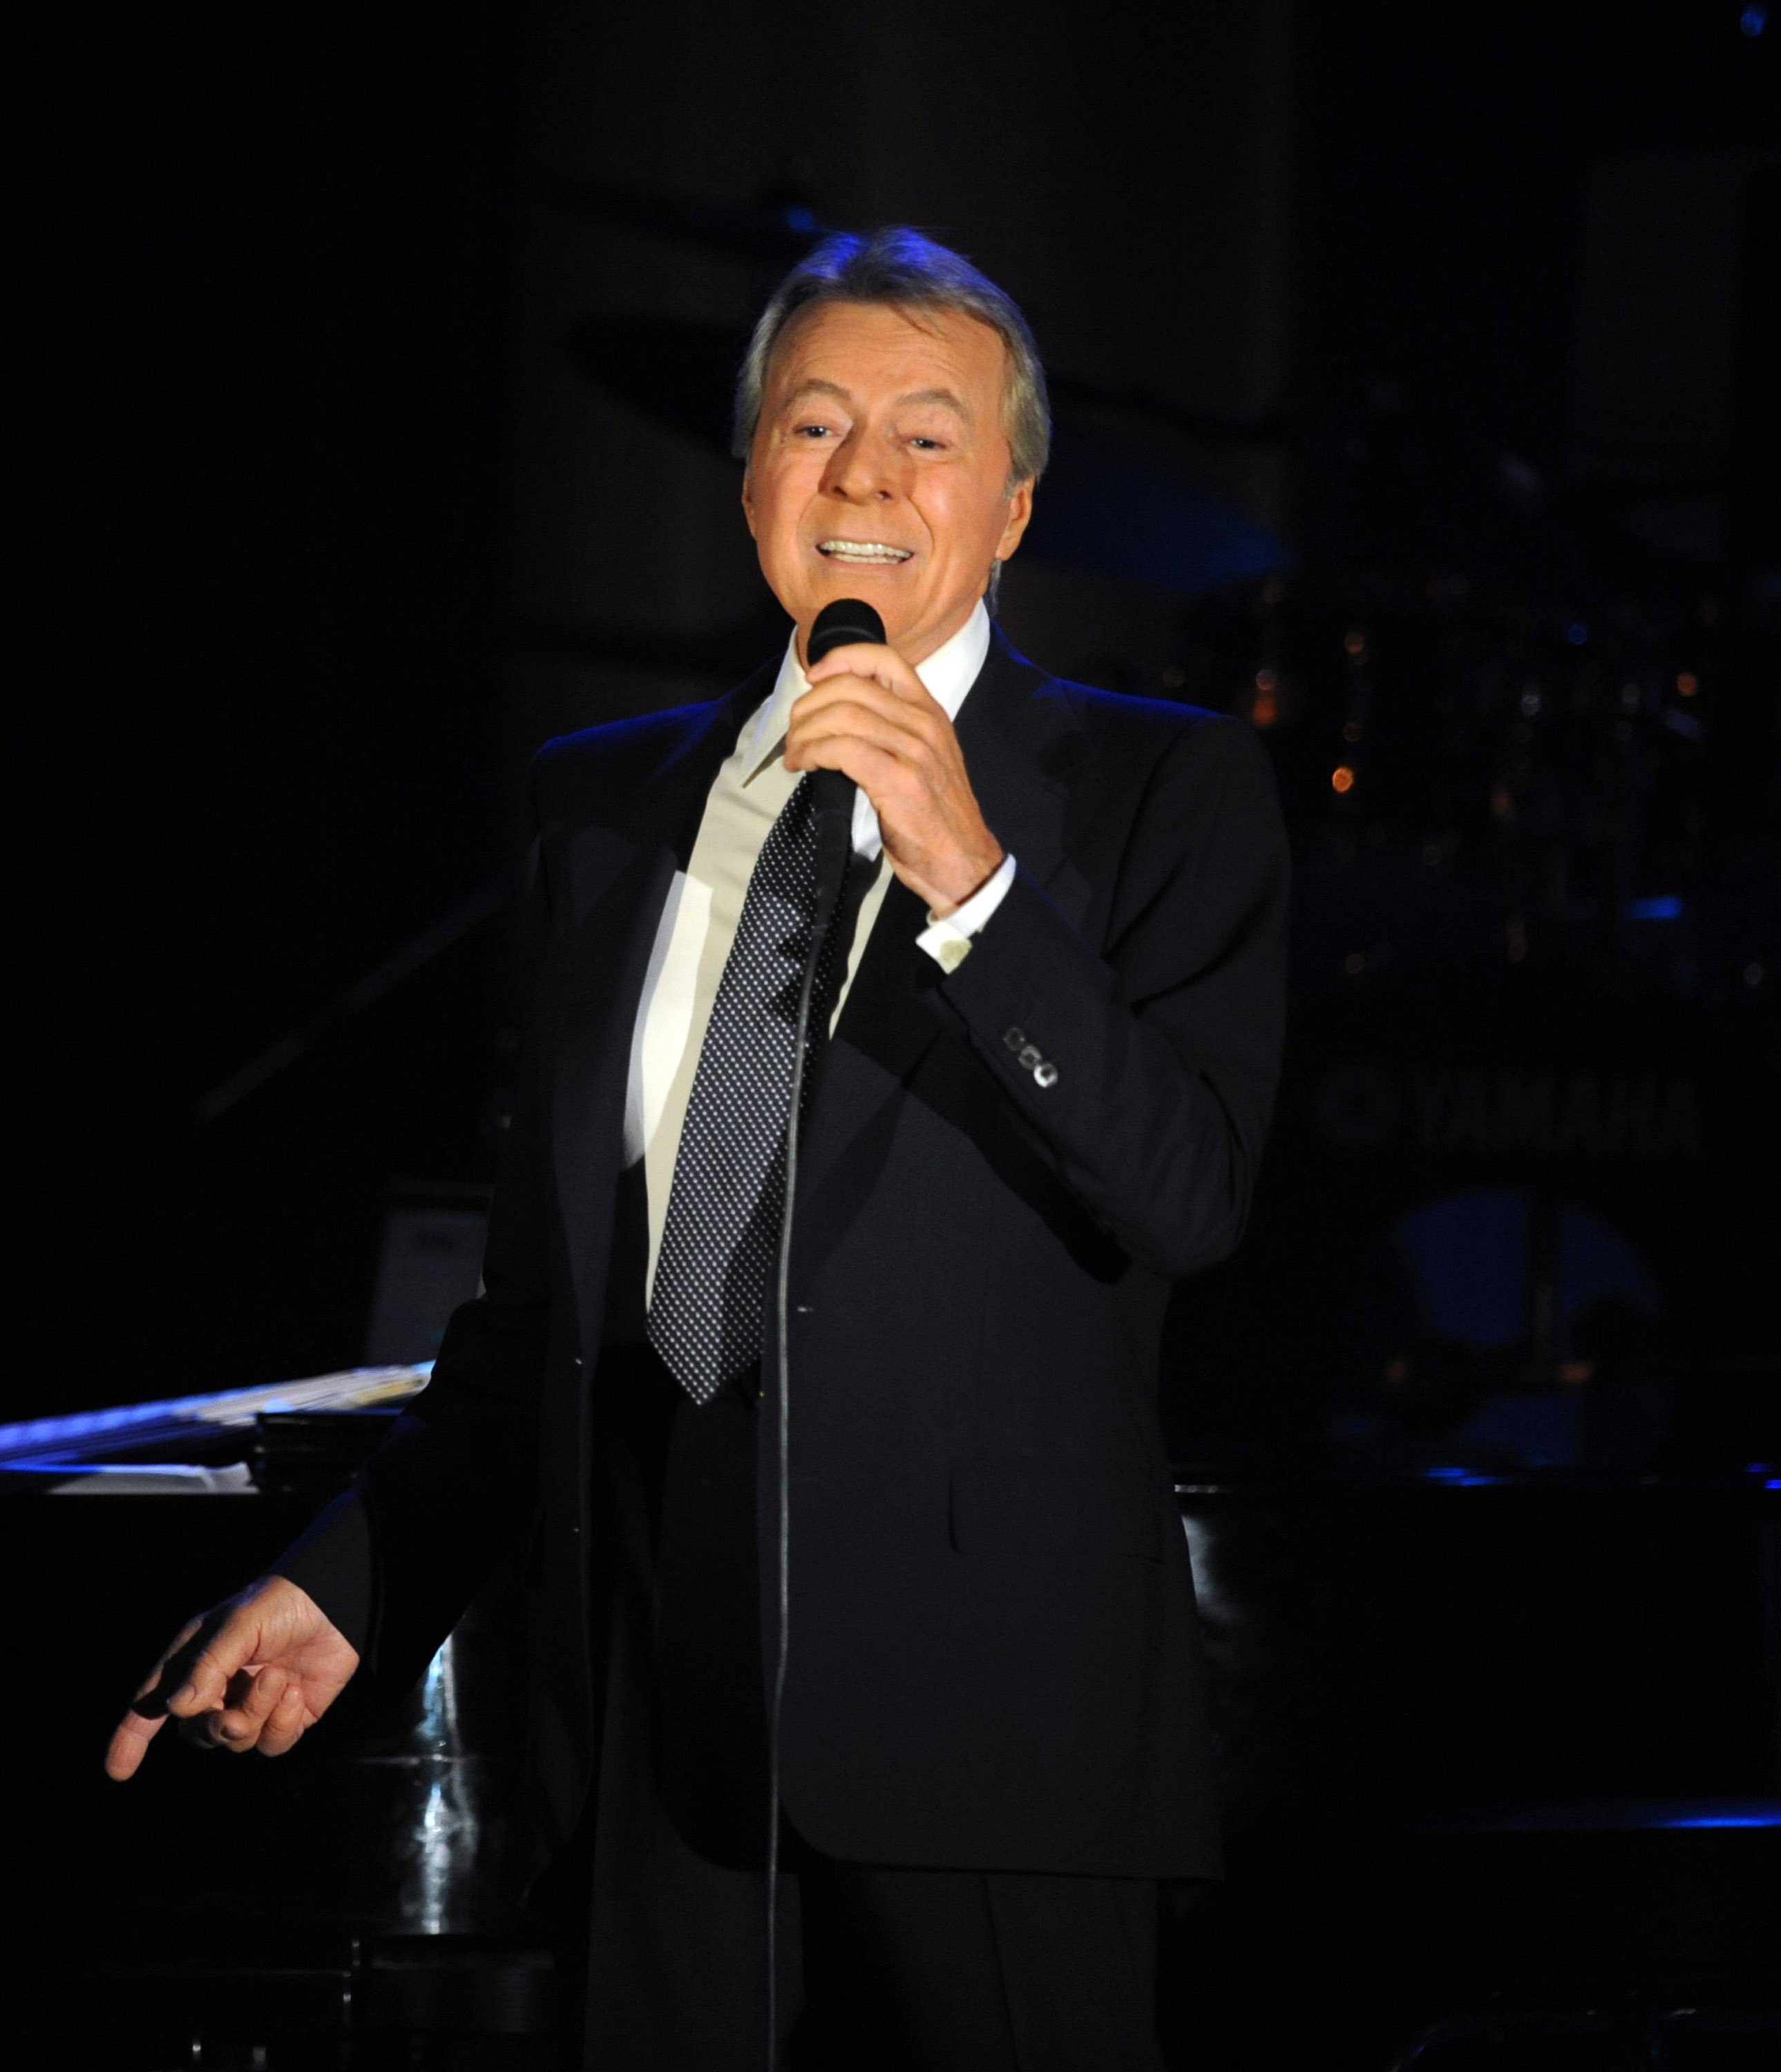 James Darren performs in concert at the Rampart Casino on November 18, 2012, in Las Vegas, Nevada. | Source: Getty Images.